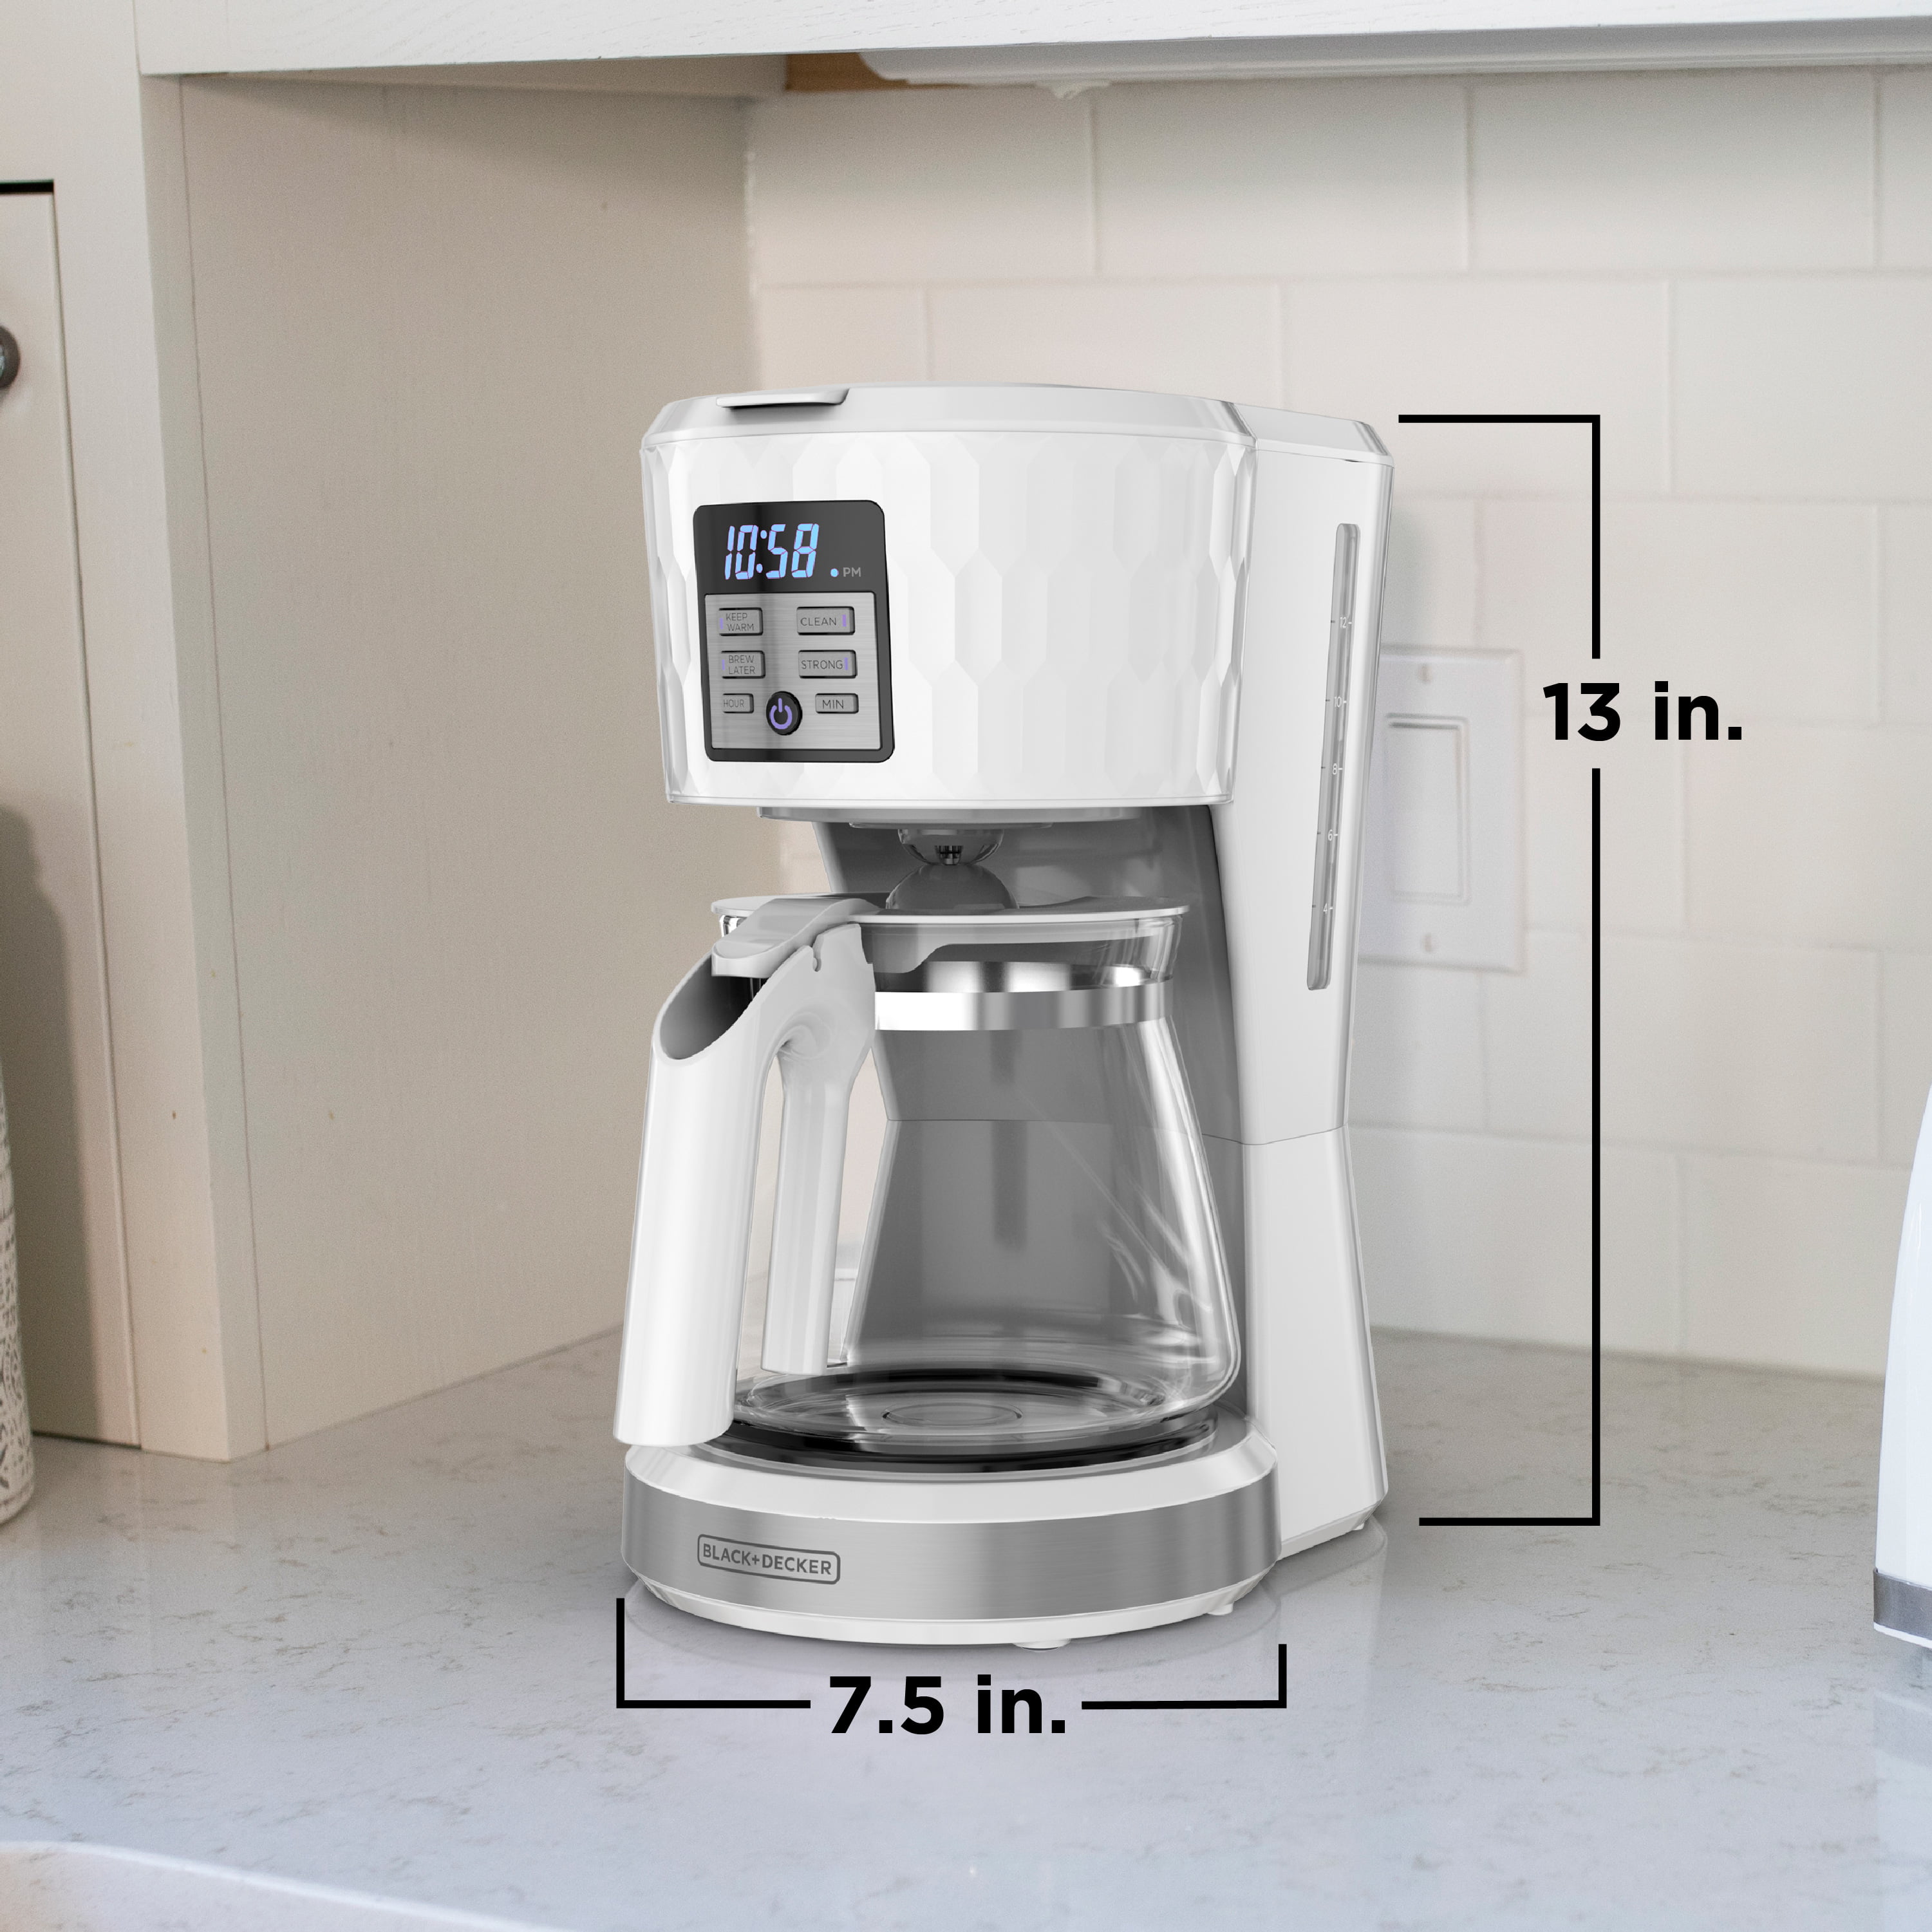 Black+Decker 12-Cup Programmable Coffee Maker With Vortex Technology  CM1331S, Color: Silver - JCPenney